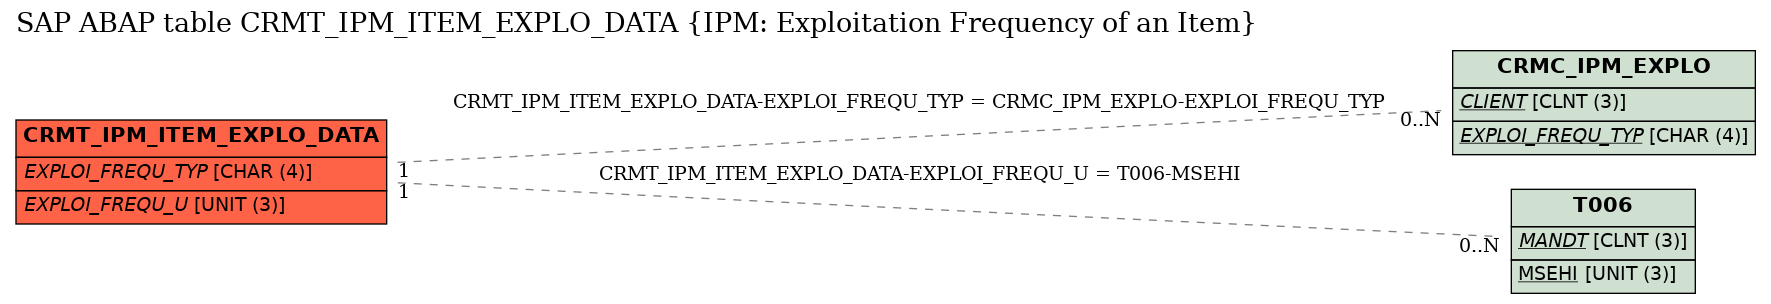 E-R Diagram for table CRMT_IPM_ITEM_EXPLO_DATA (IPM: Exploitation Frequency of an Item)